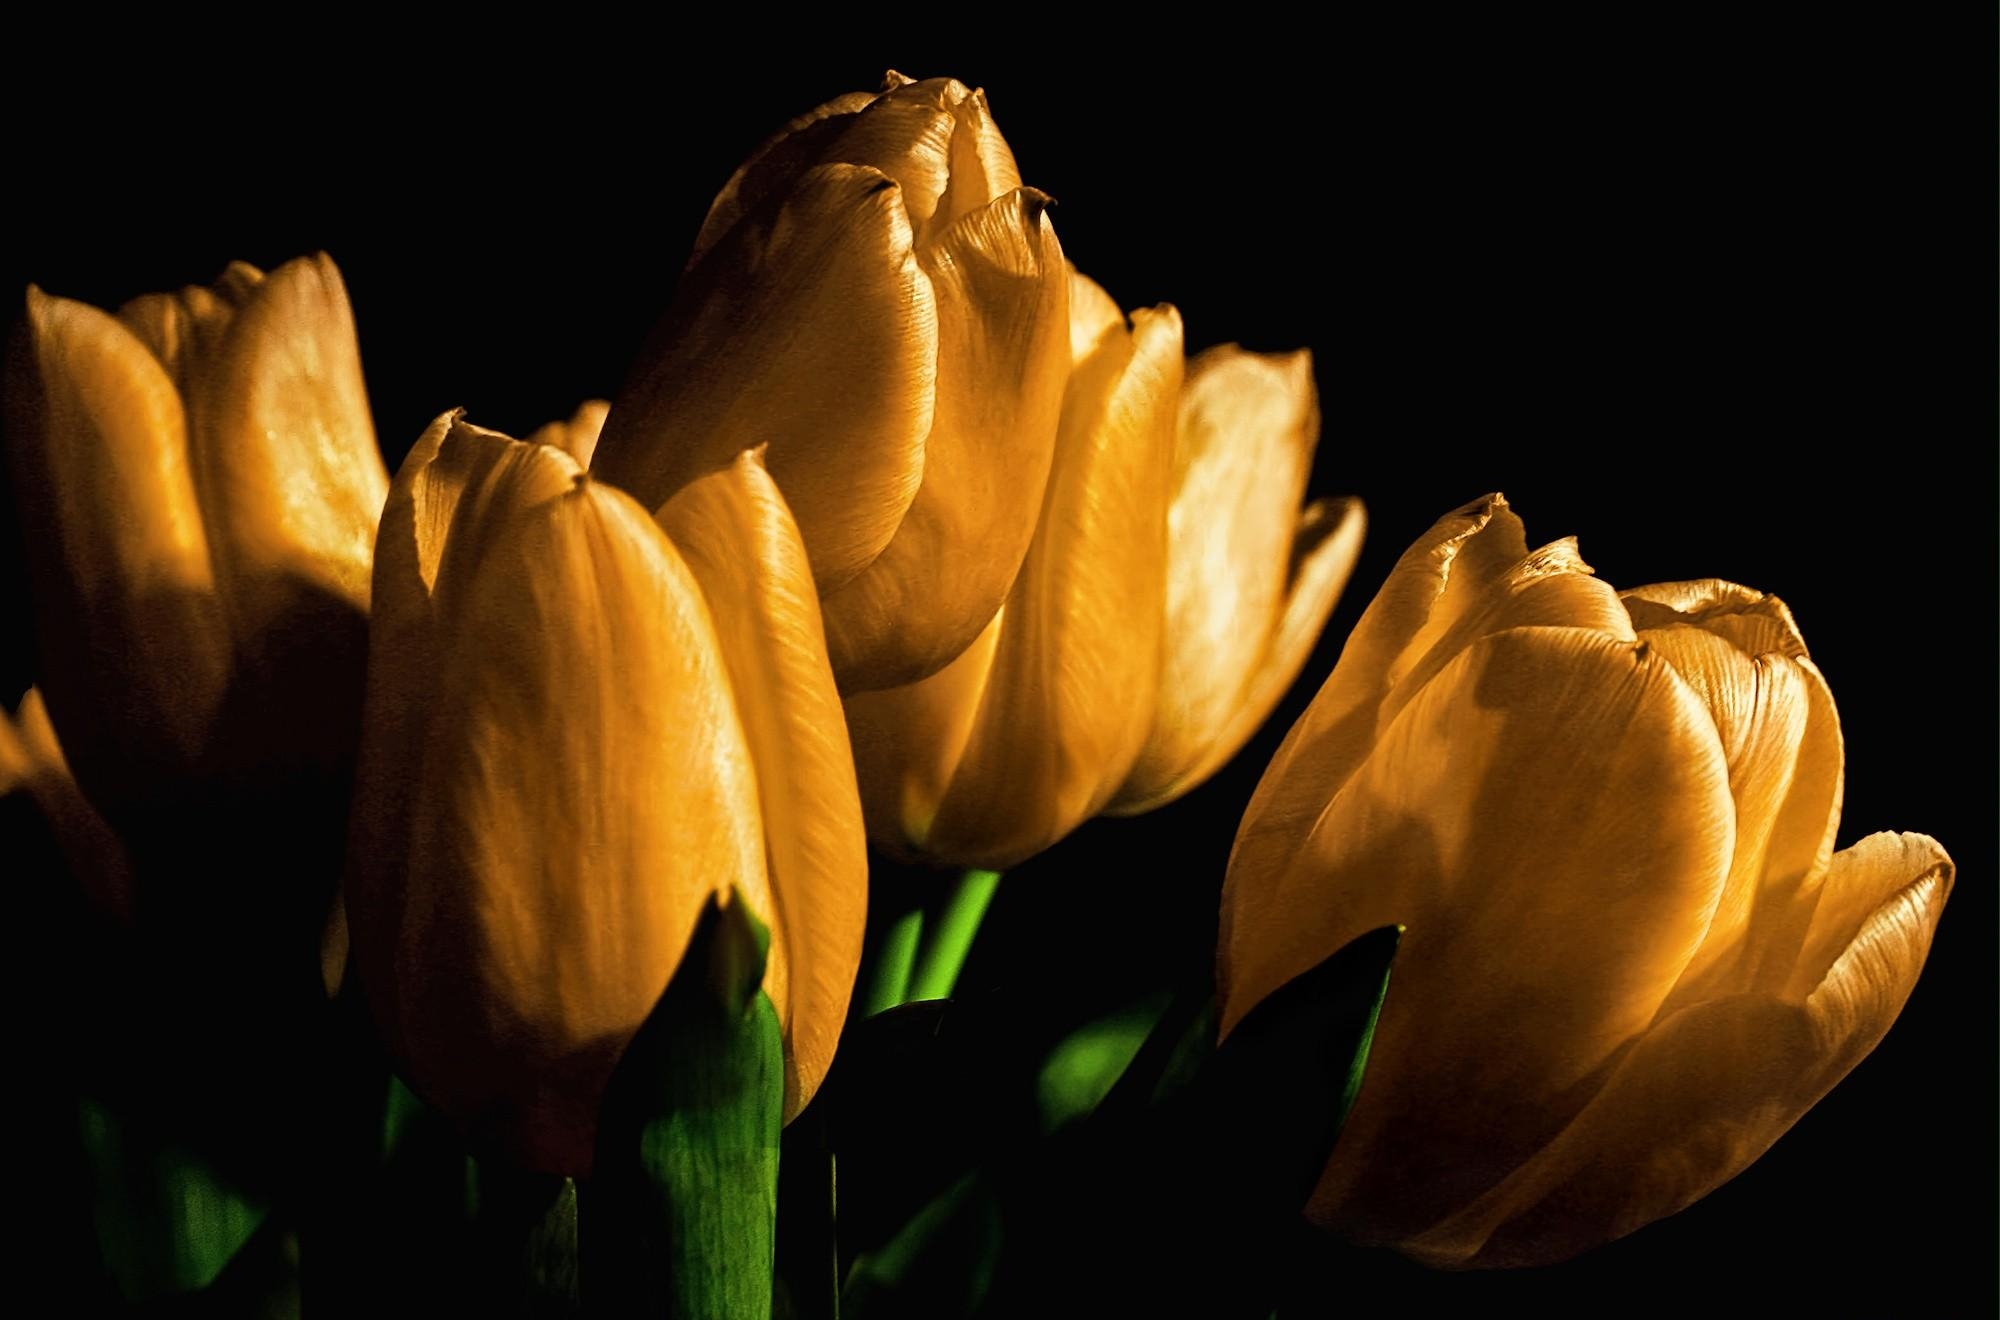 Wallpaper for mobile devices light, flowers, tulips, buds